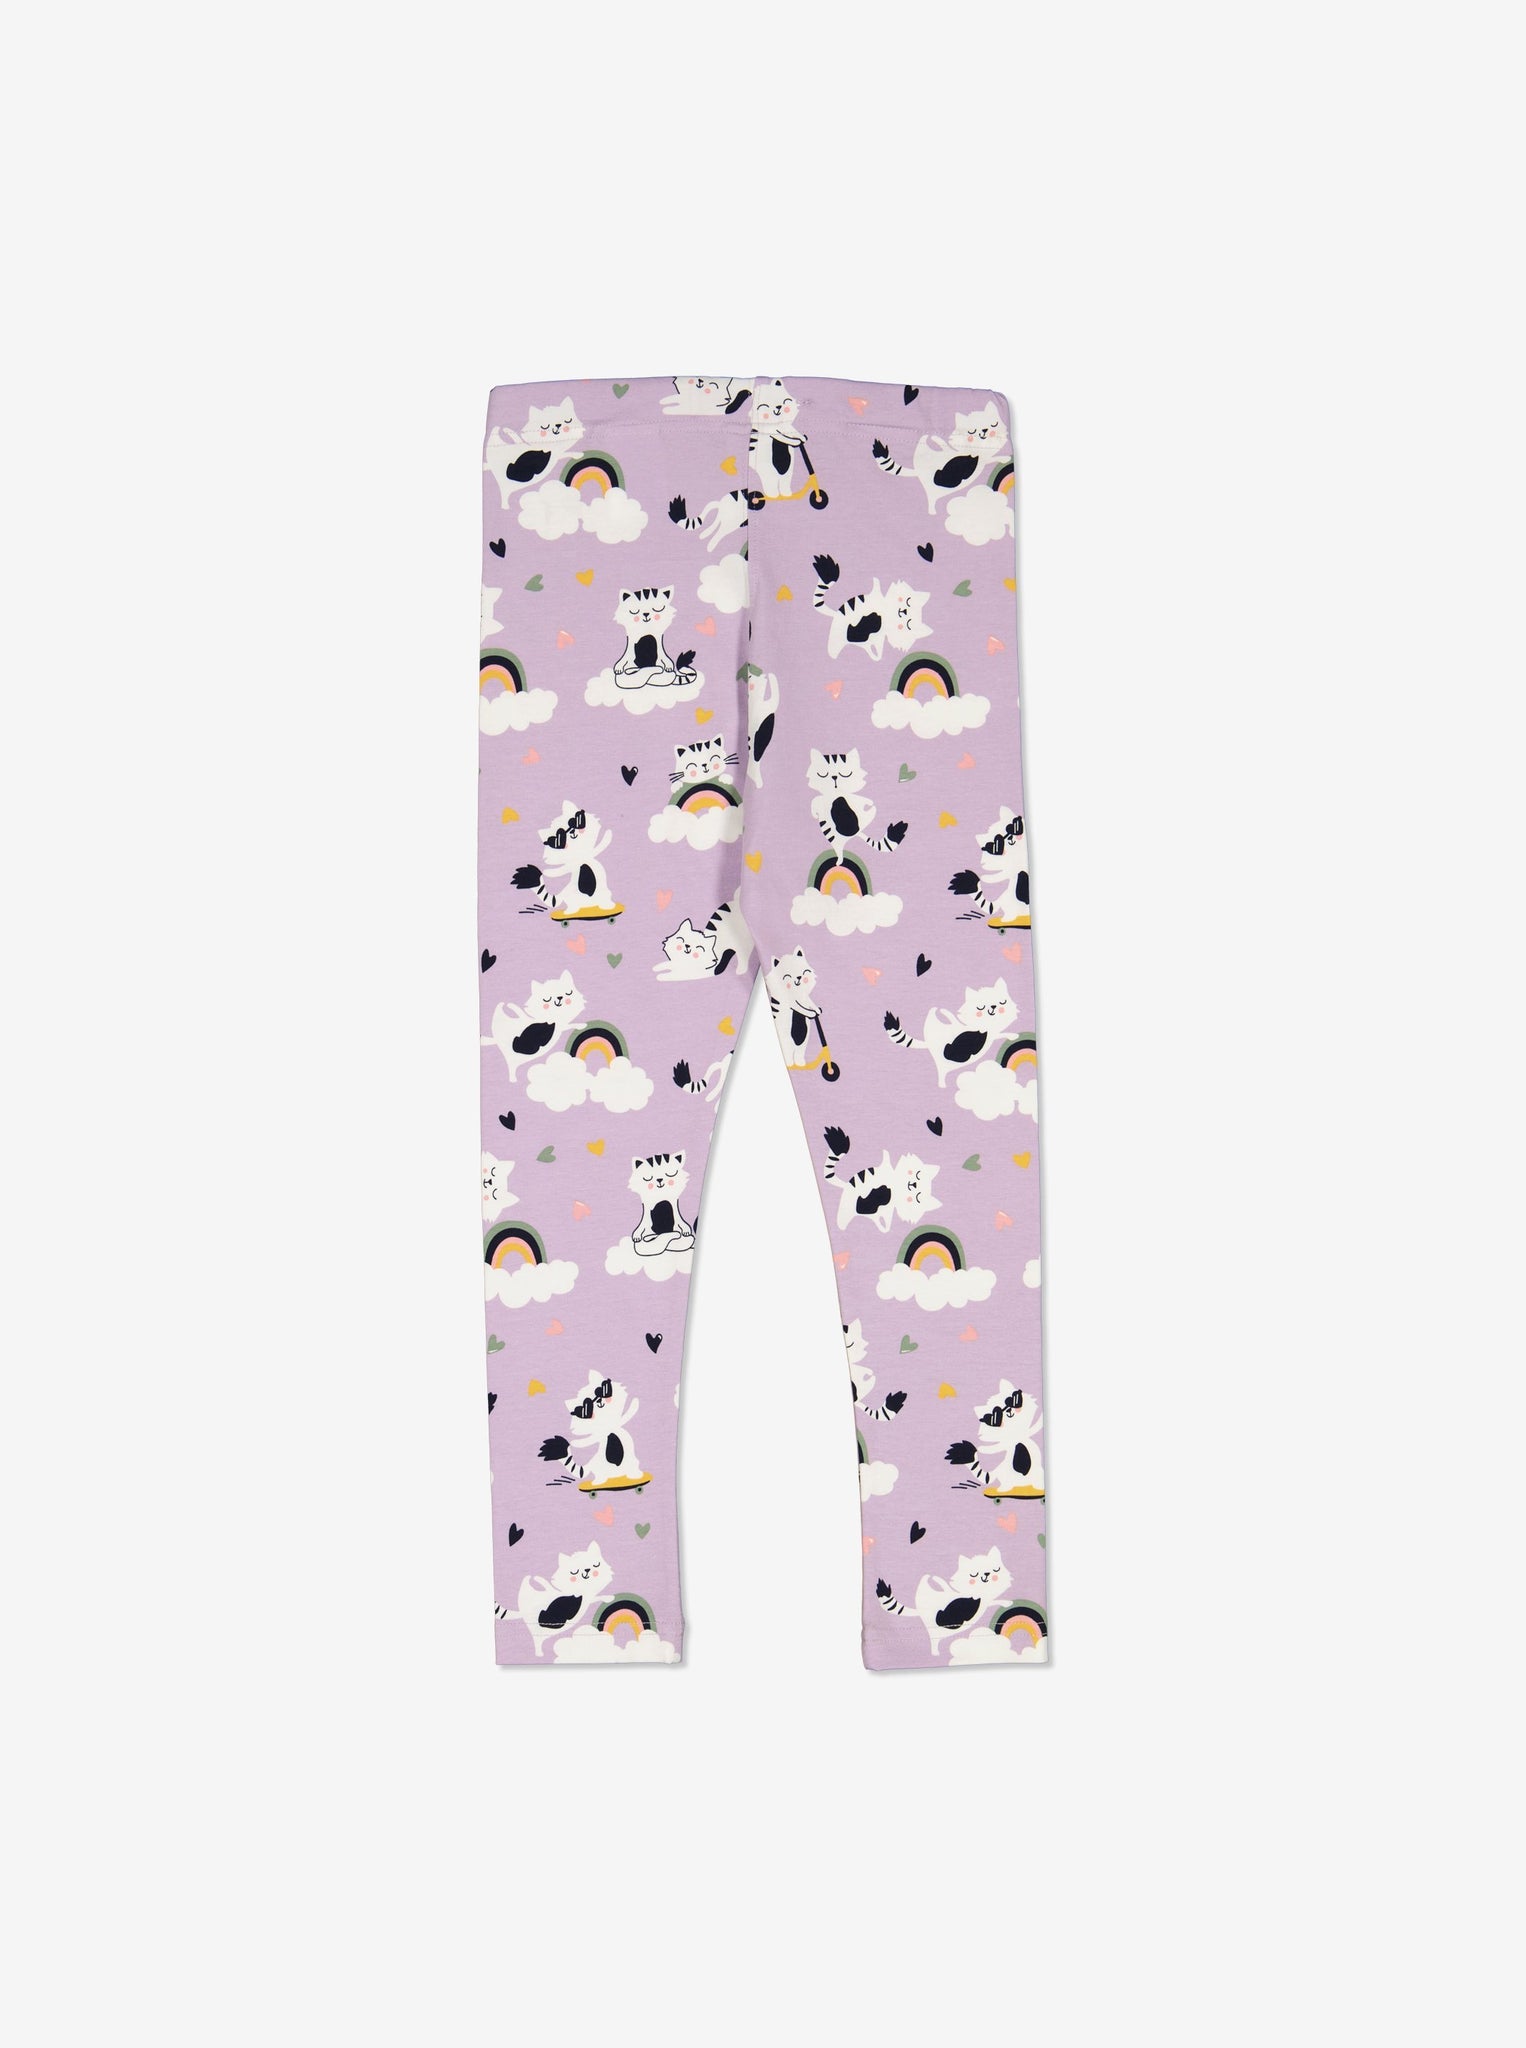  Organic Pink Kitten Print Leggings from Polarn O. Pyret Kidswear. Made from ethically sourced materials.